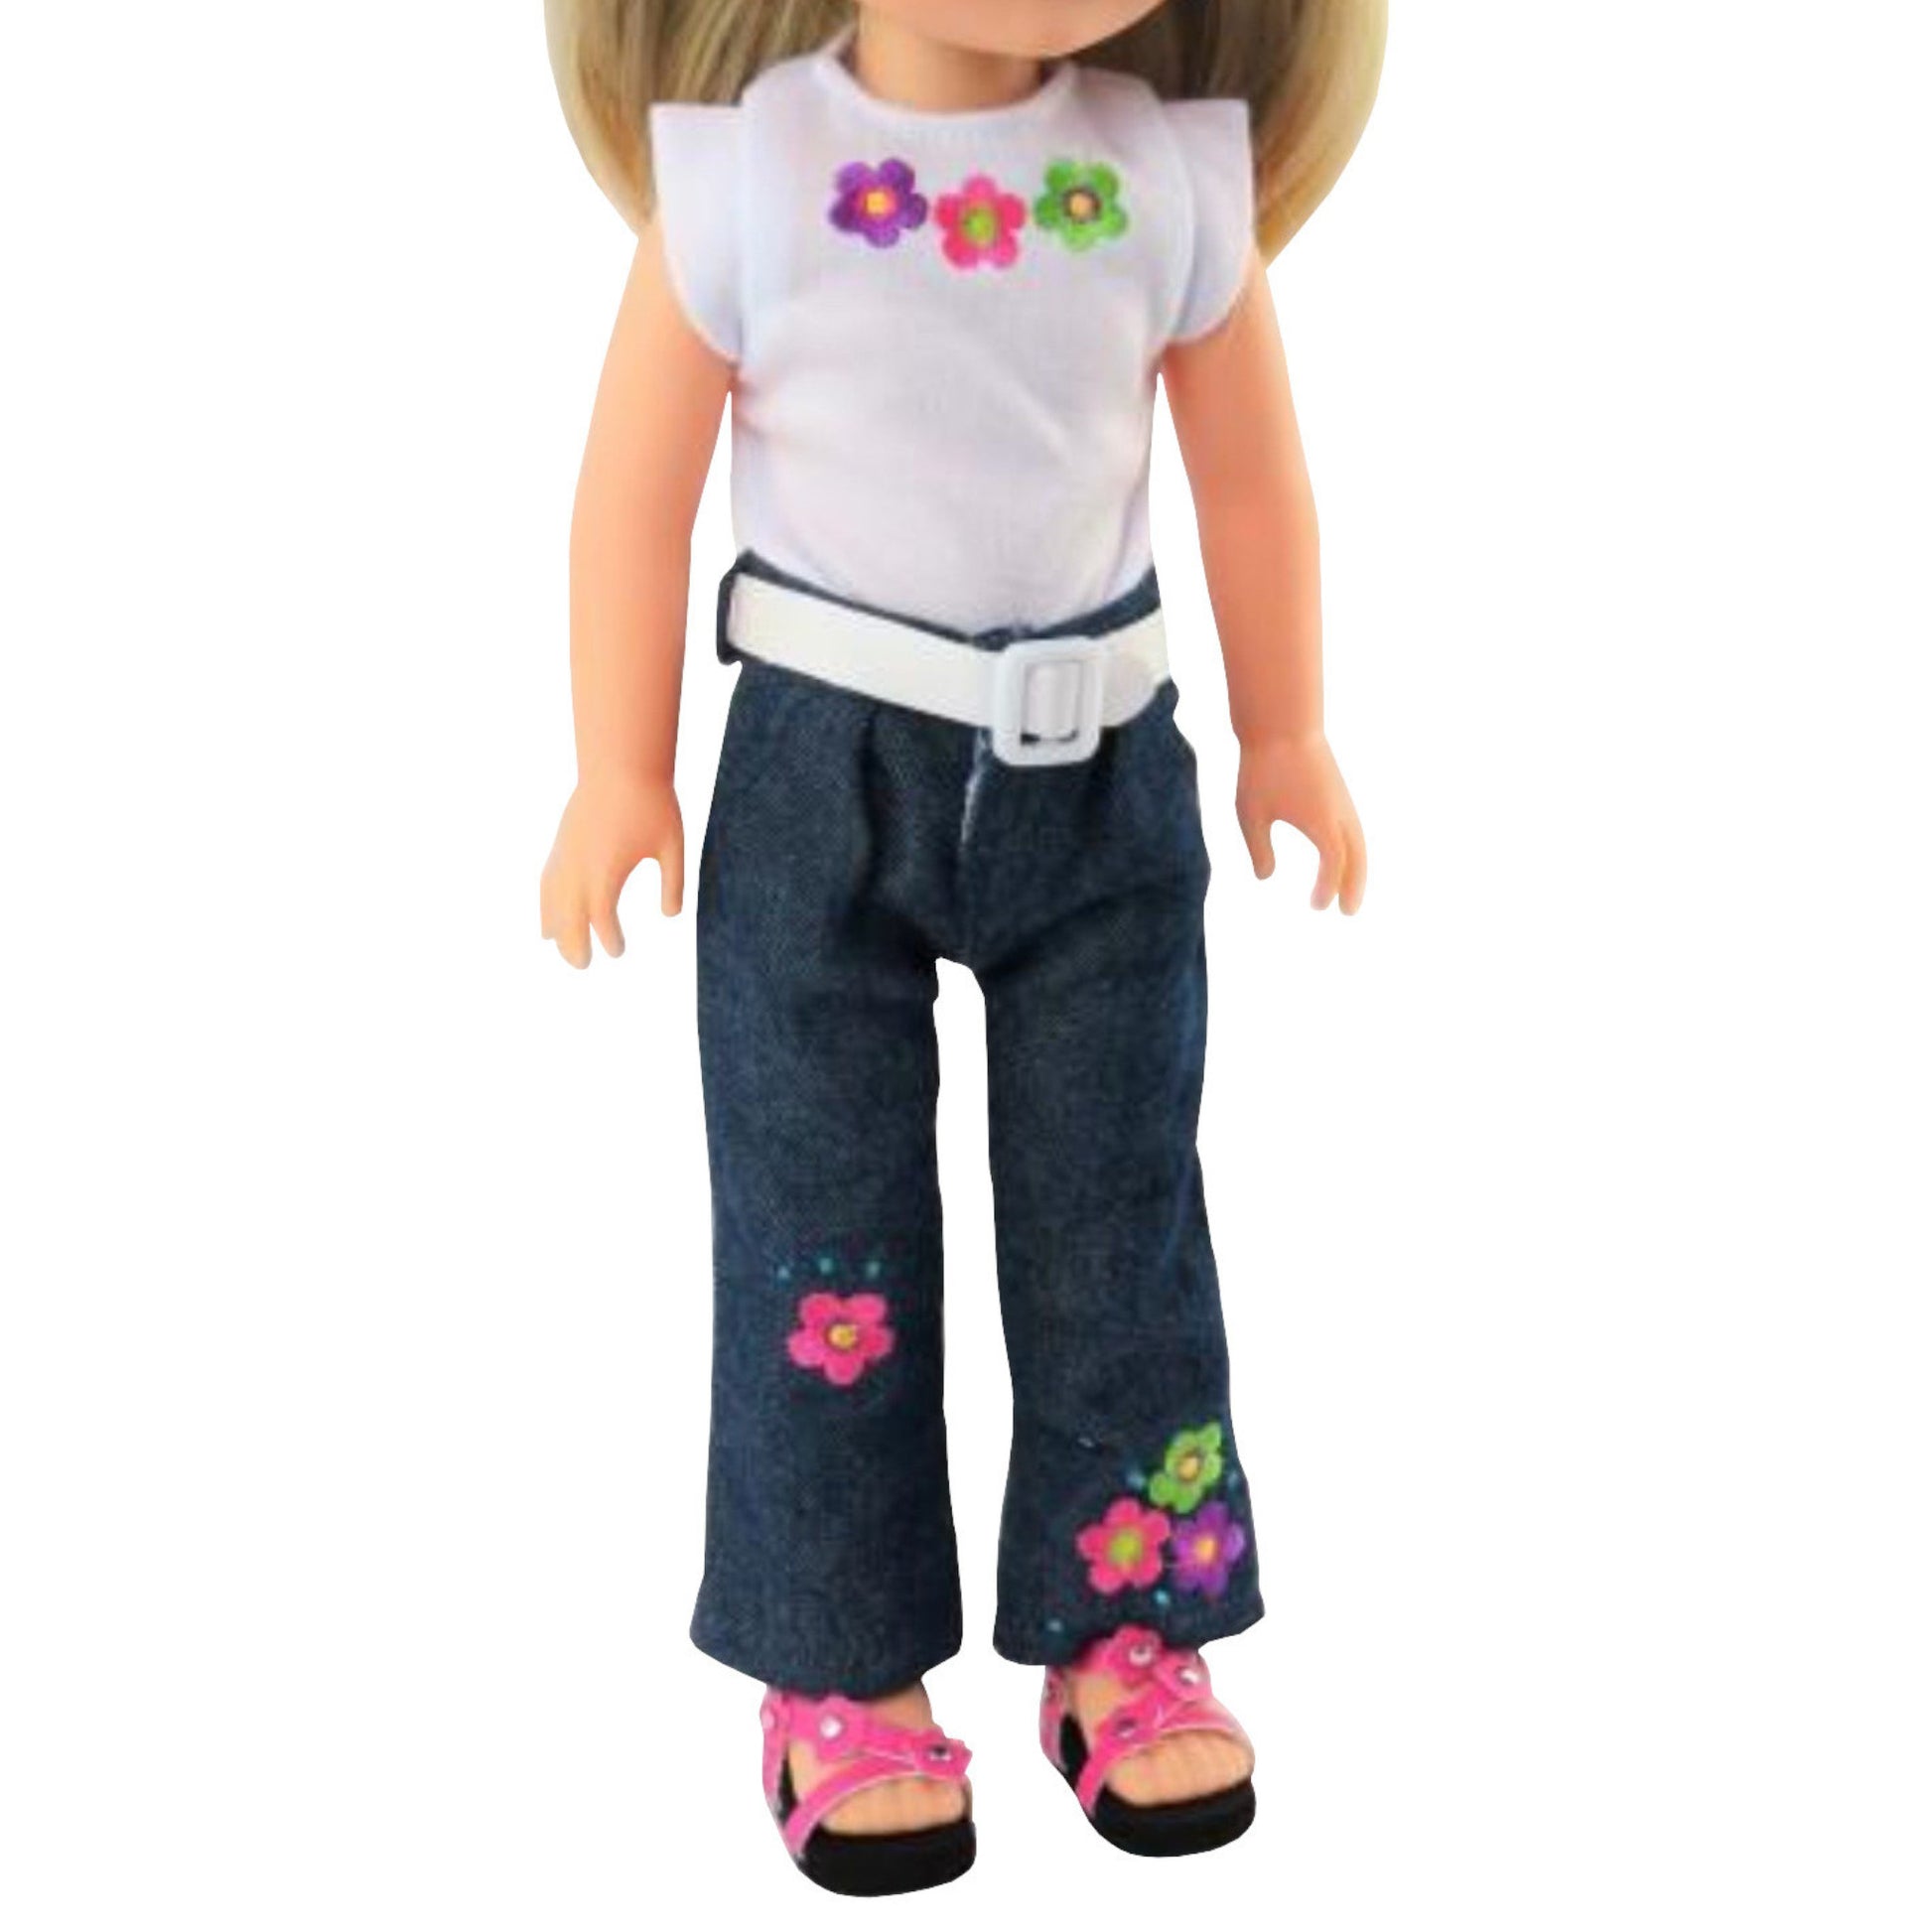 Flower Power Shirt and Jeans for 14 1/2-inch dolls with doll 